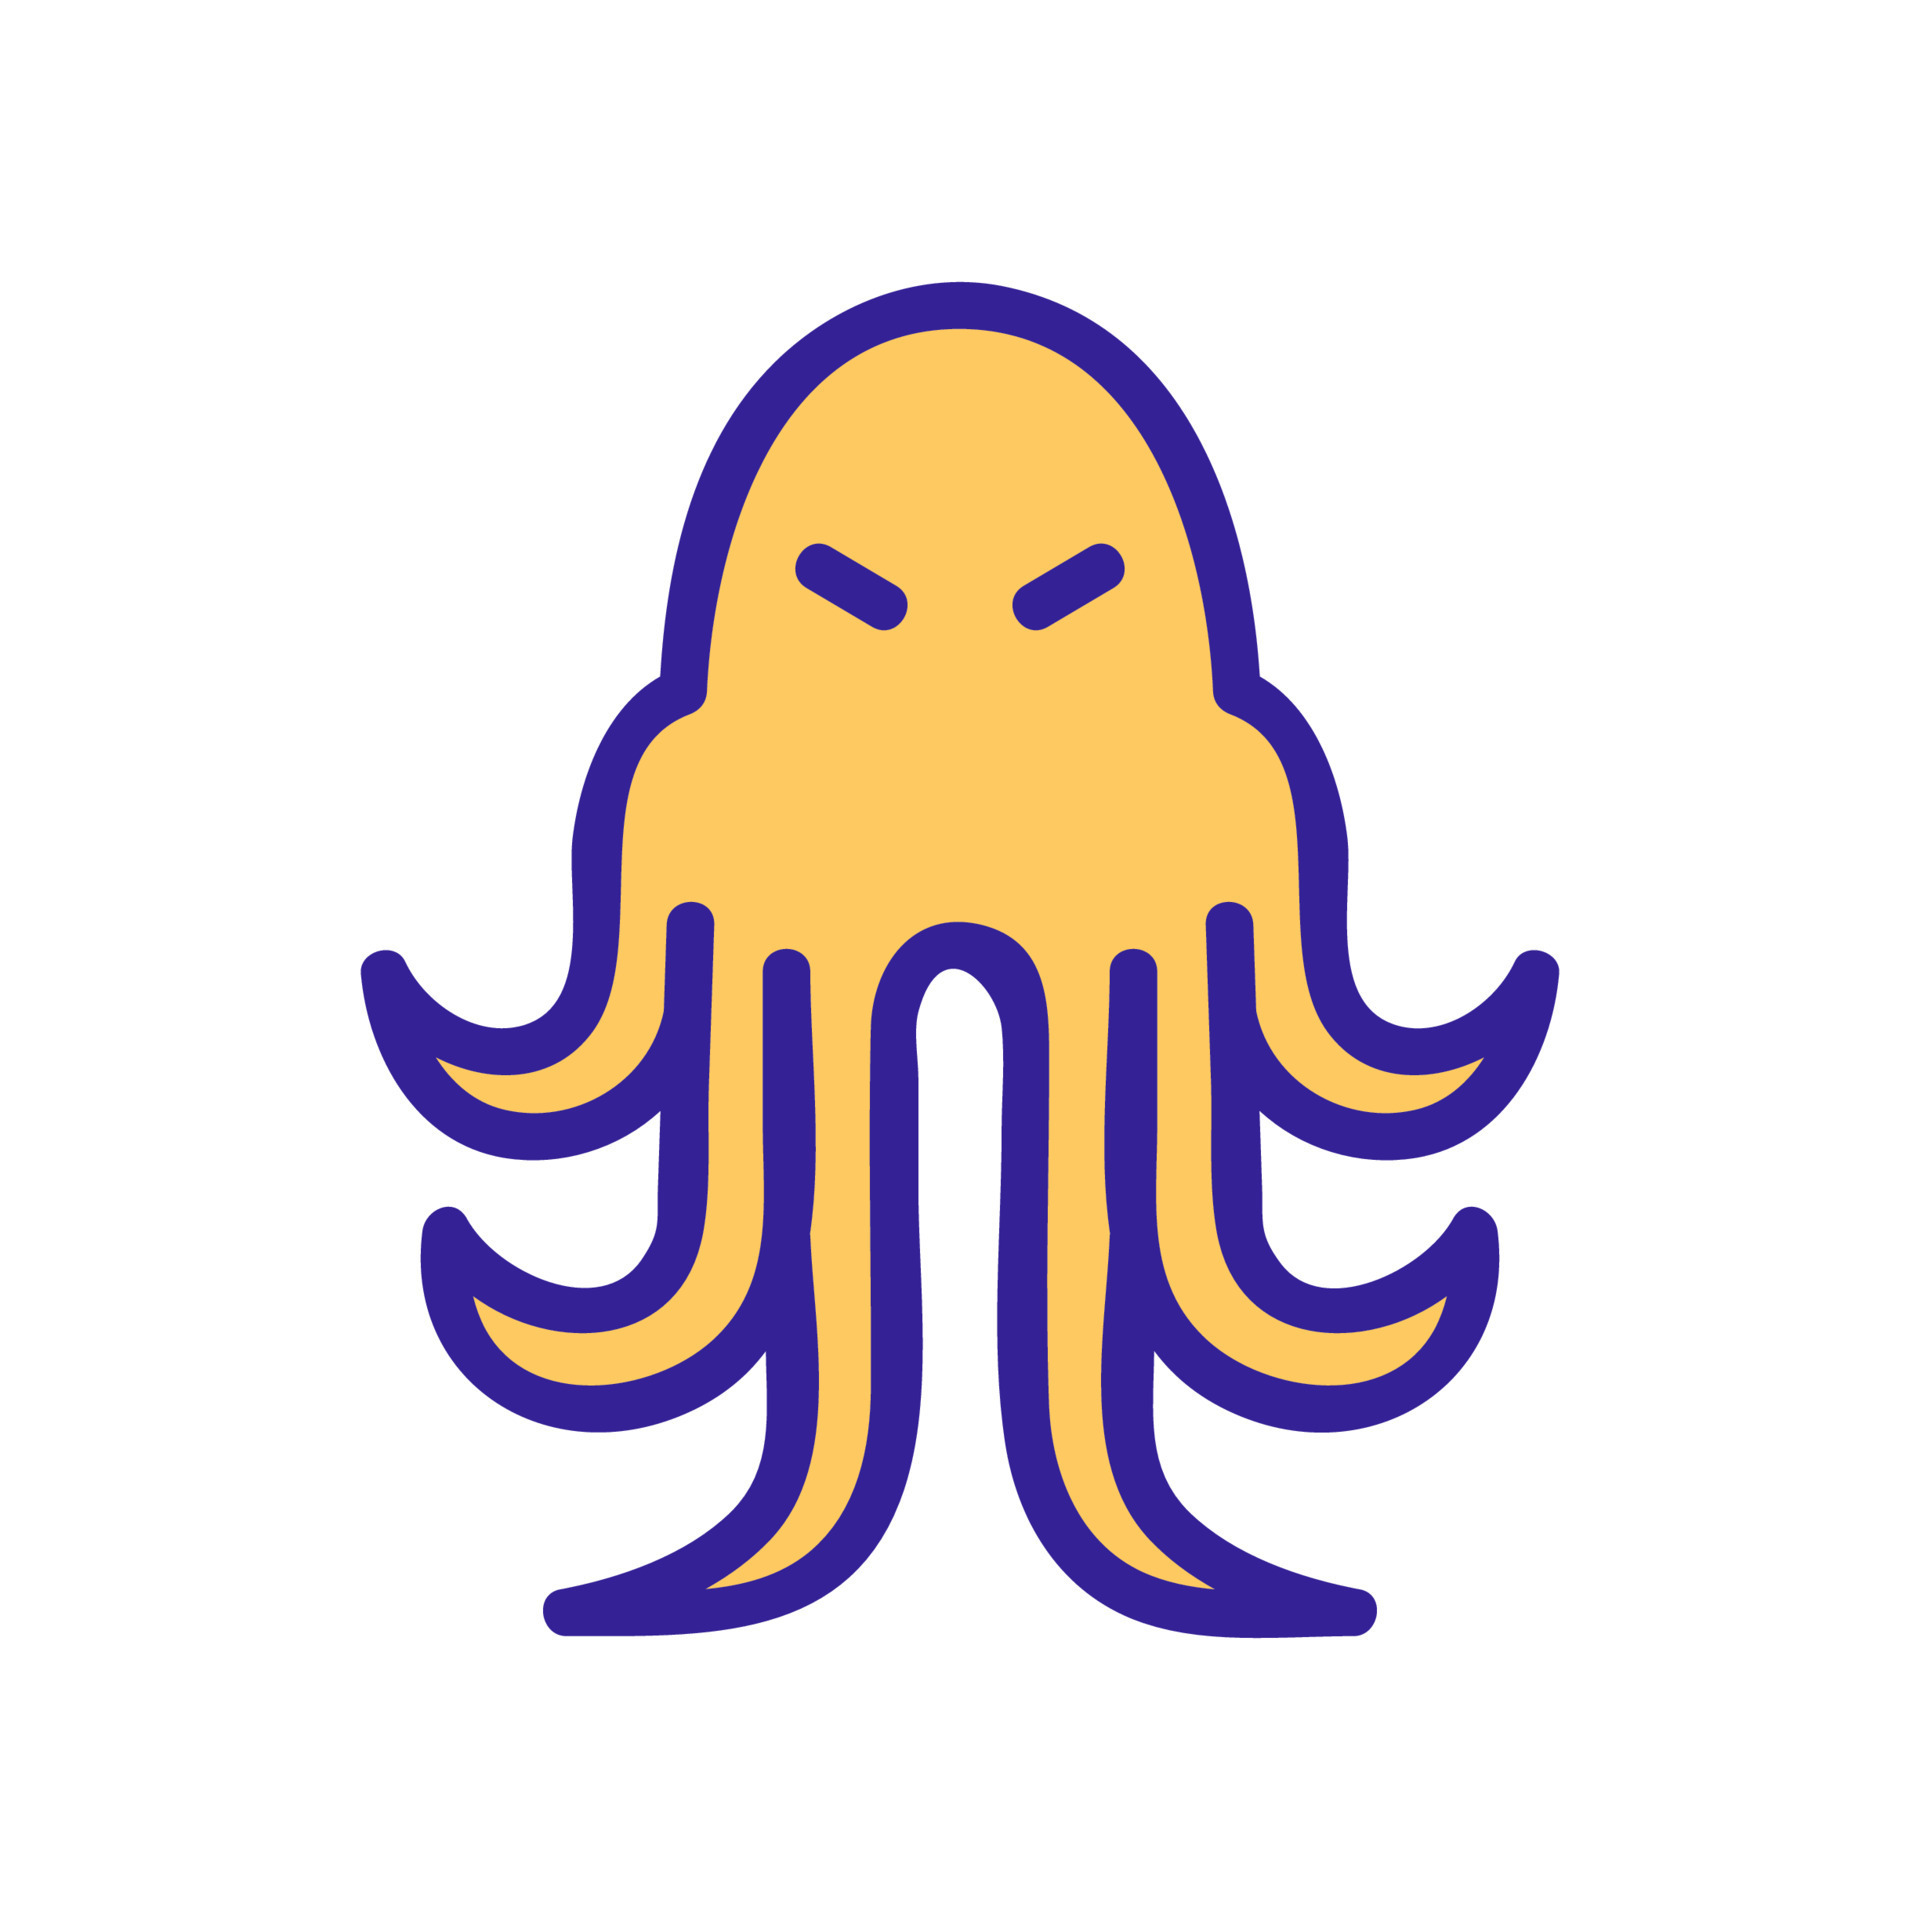 https://static.vecteezy.com/system/resources/previews/009/890/635/original/angry-squid-with-long-tentacles-icon-outline-illustration-vector.jpg